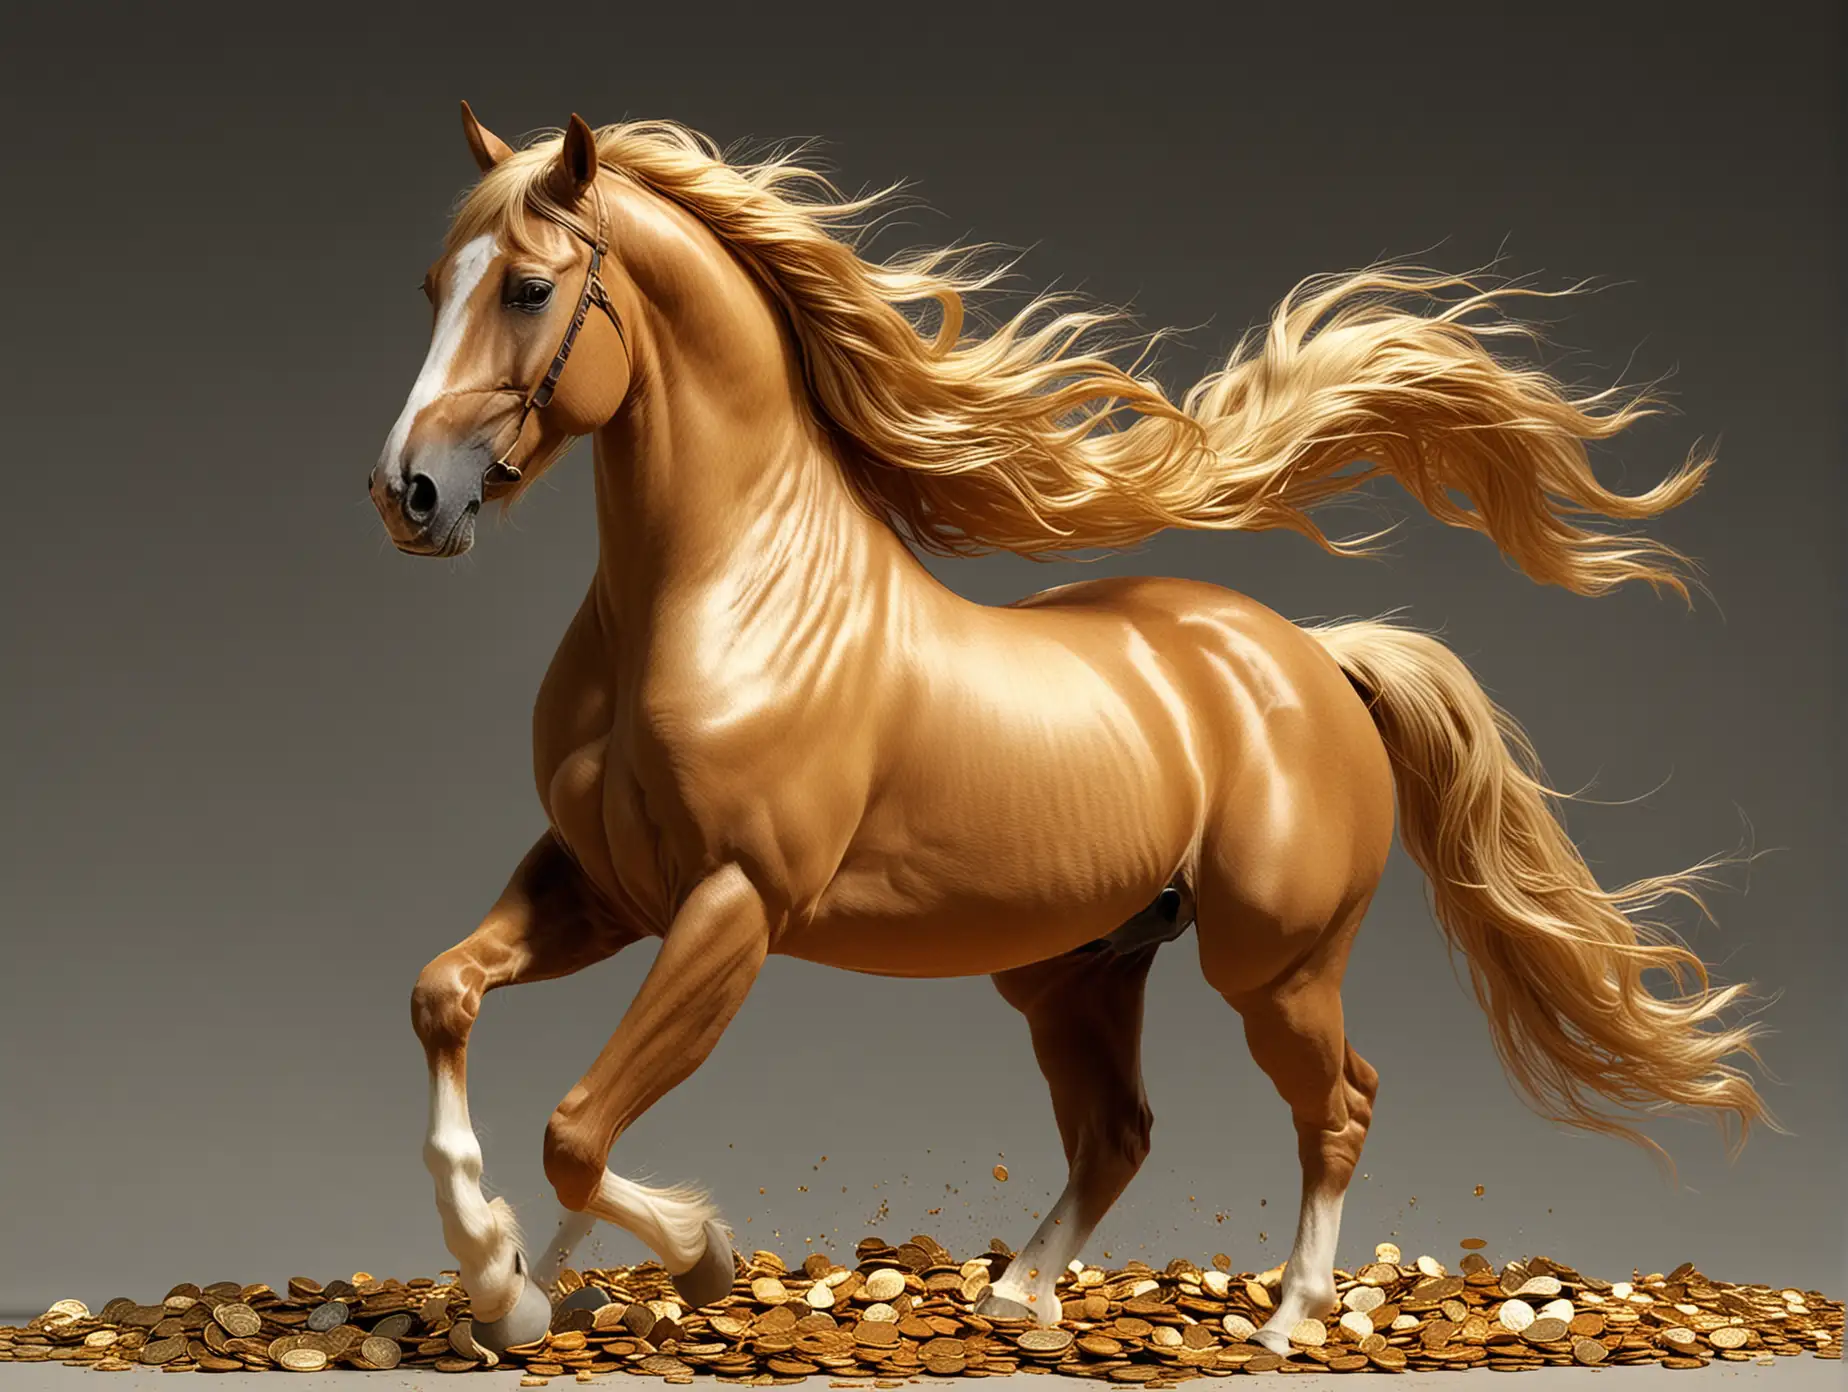 Golden-Horse-Galloping-Over-Pile-of-Coins